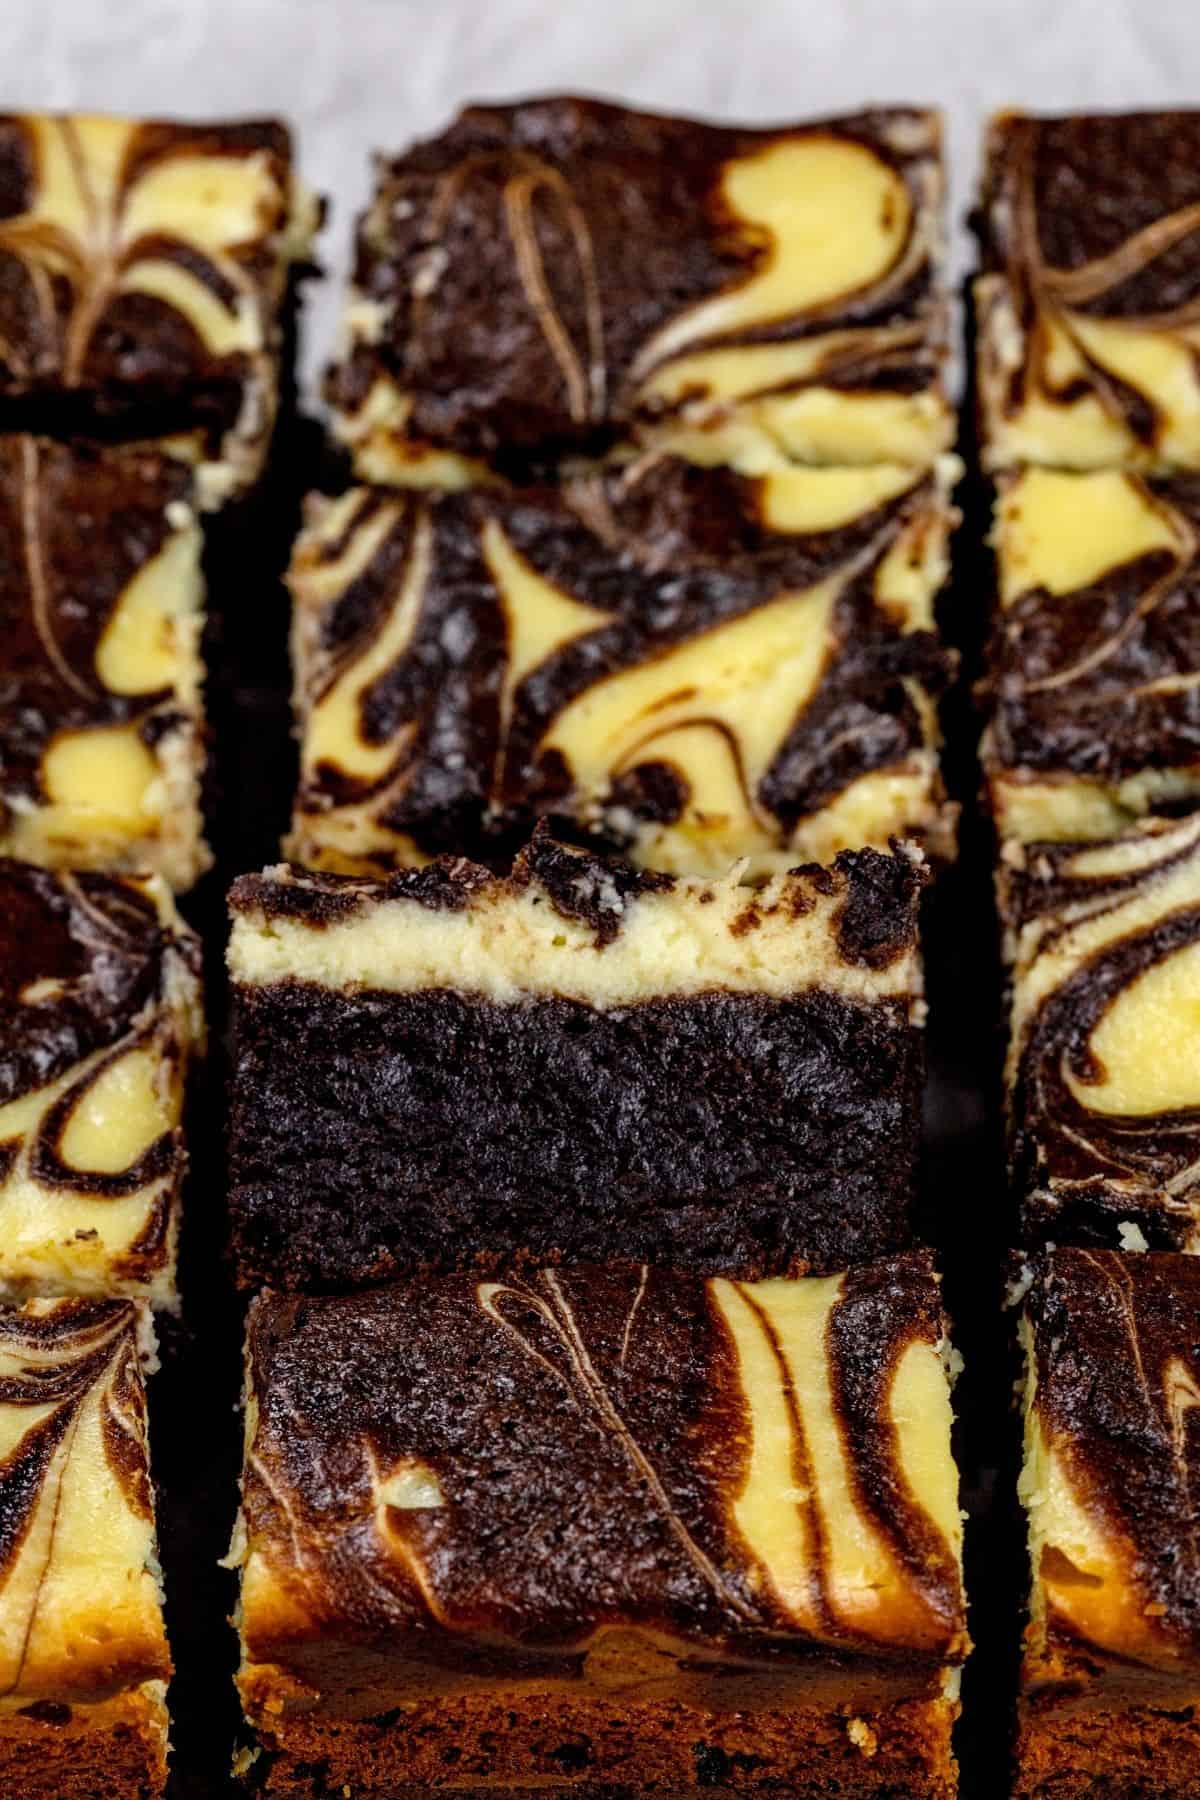 Looking down at the many slices of brownie in rows on white parchment paper. One brownie is on it's side so you can see the layers of brownie, cheesecake, and swirls.